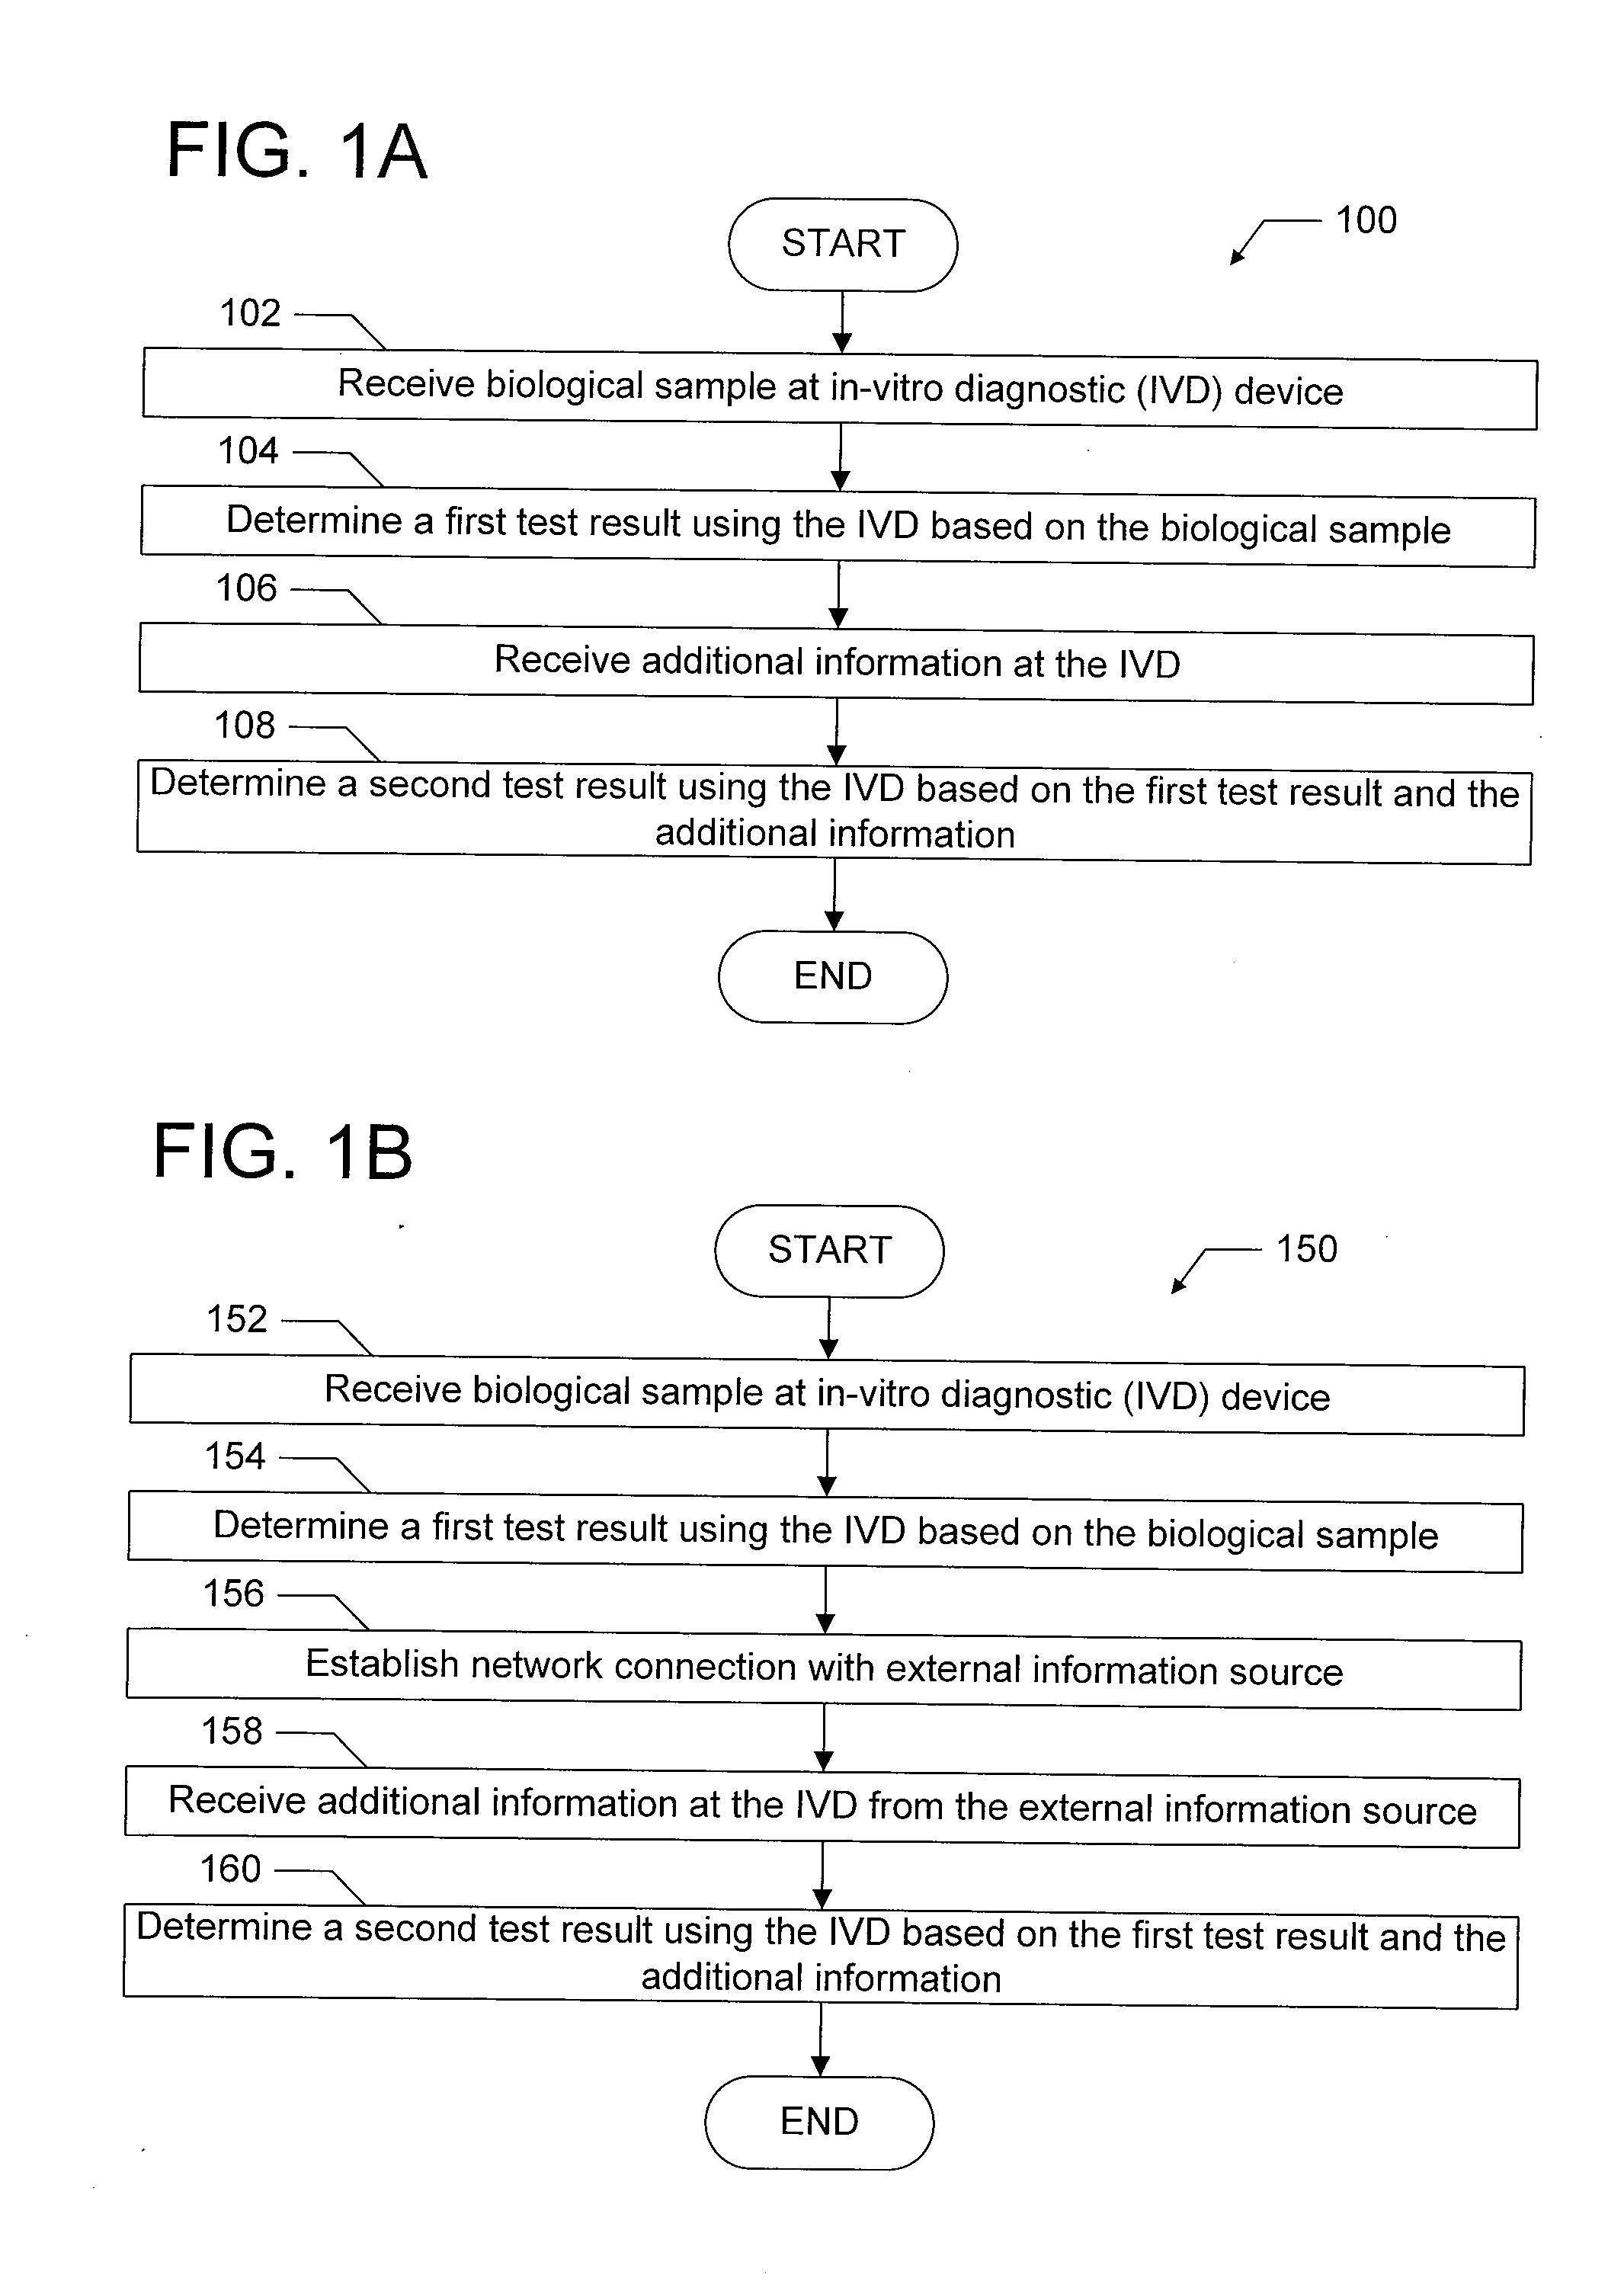 Distributed network of in-vitro diagnostic devices